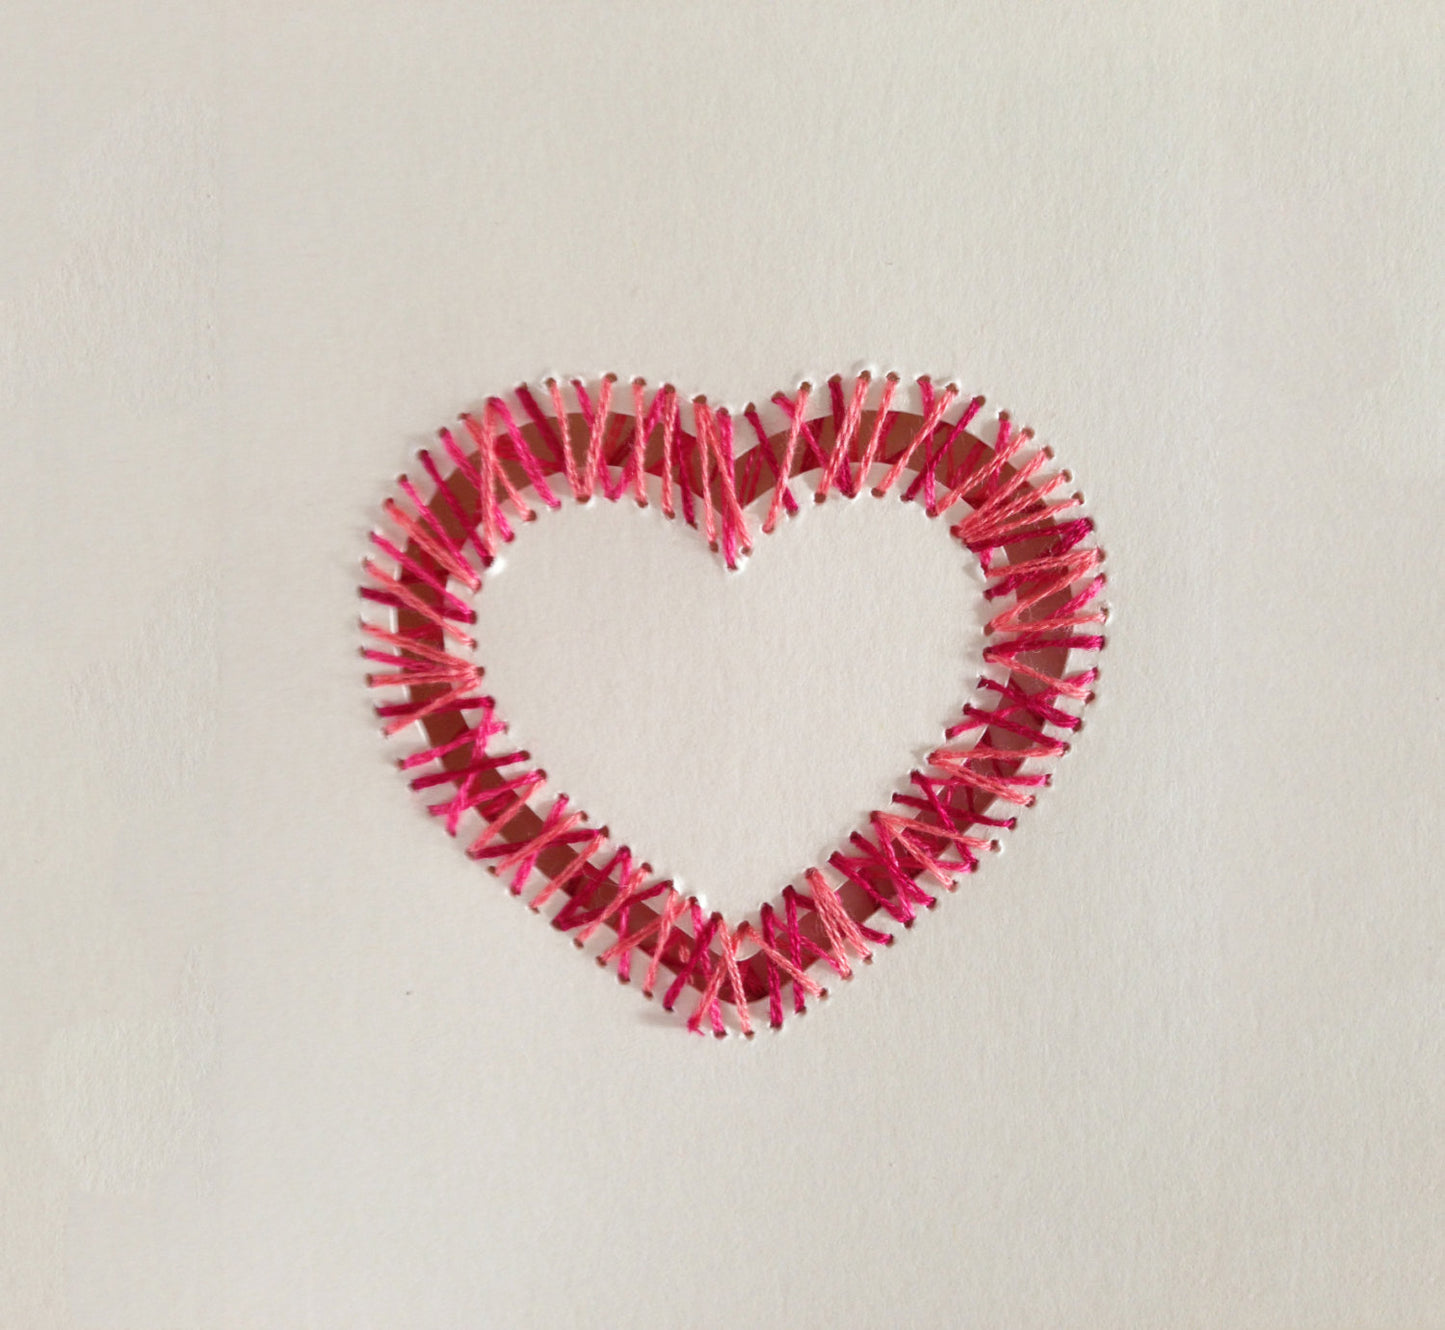 Hand-stitched Suspended Heart Card